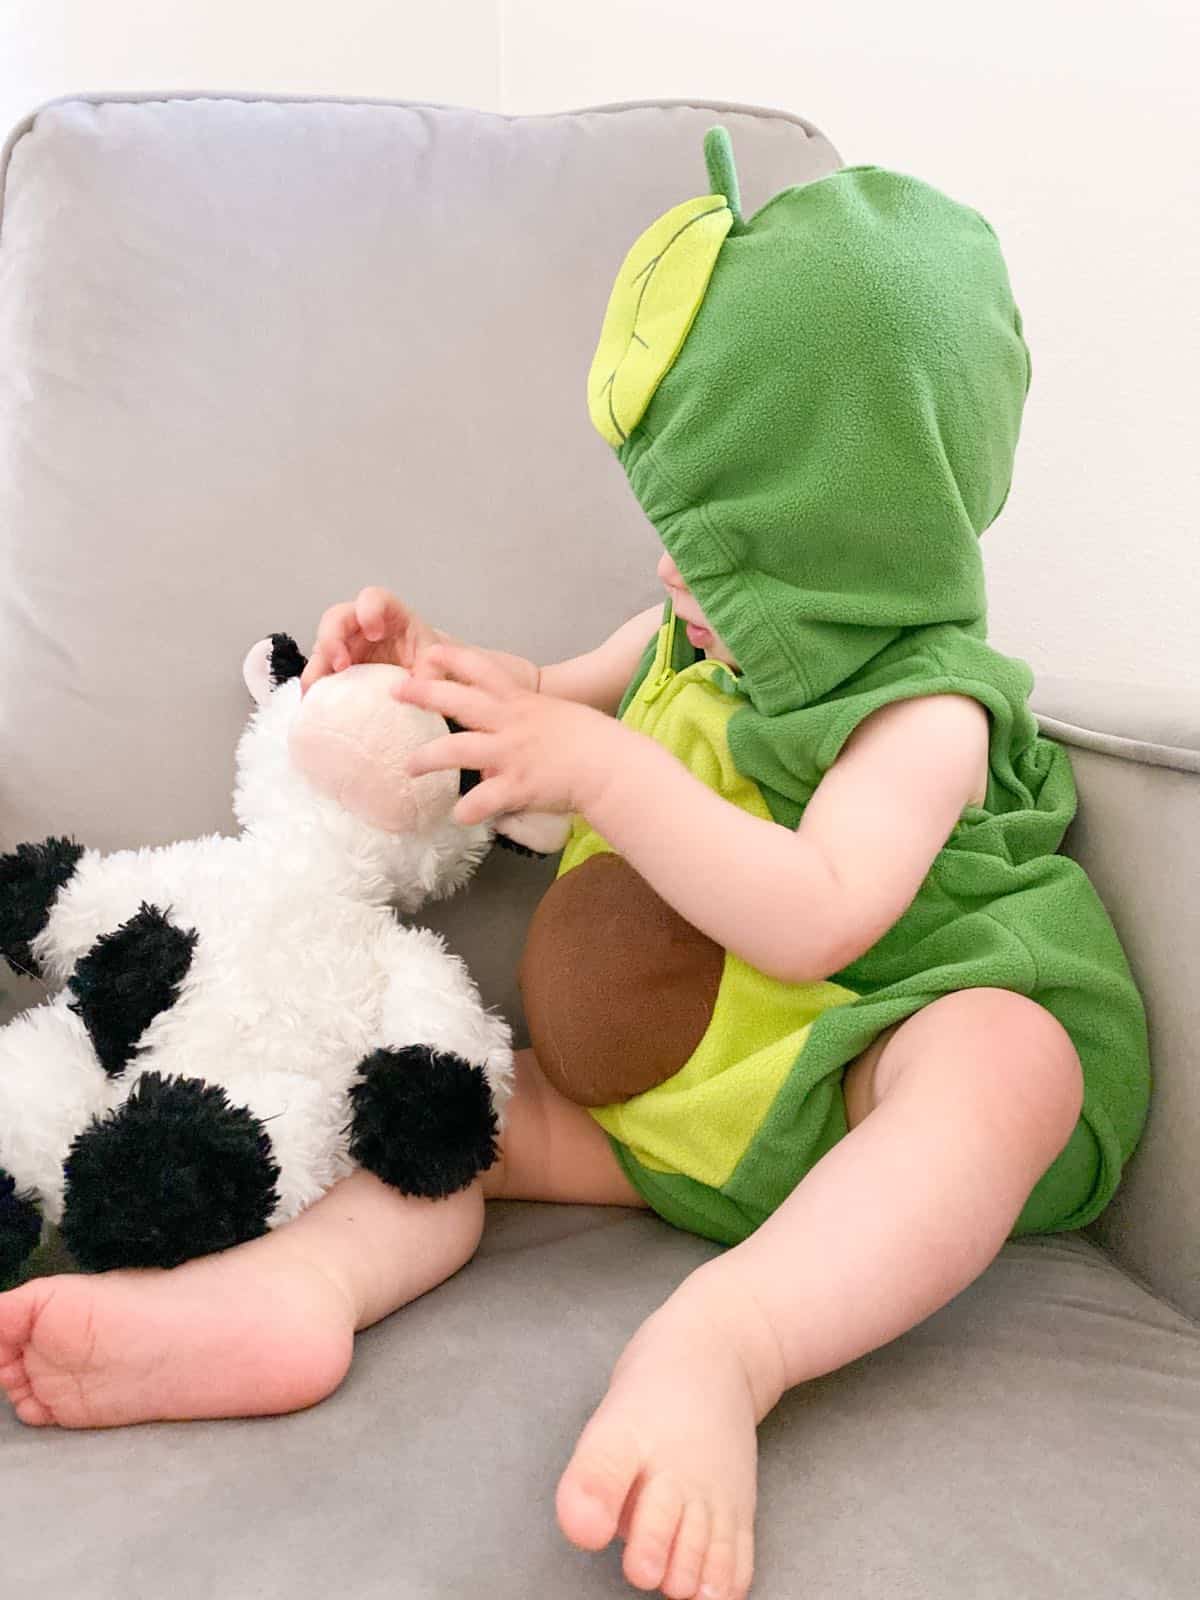 Vegan Toddler wearing an avocado Halloween costume and holding a cow